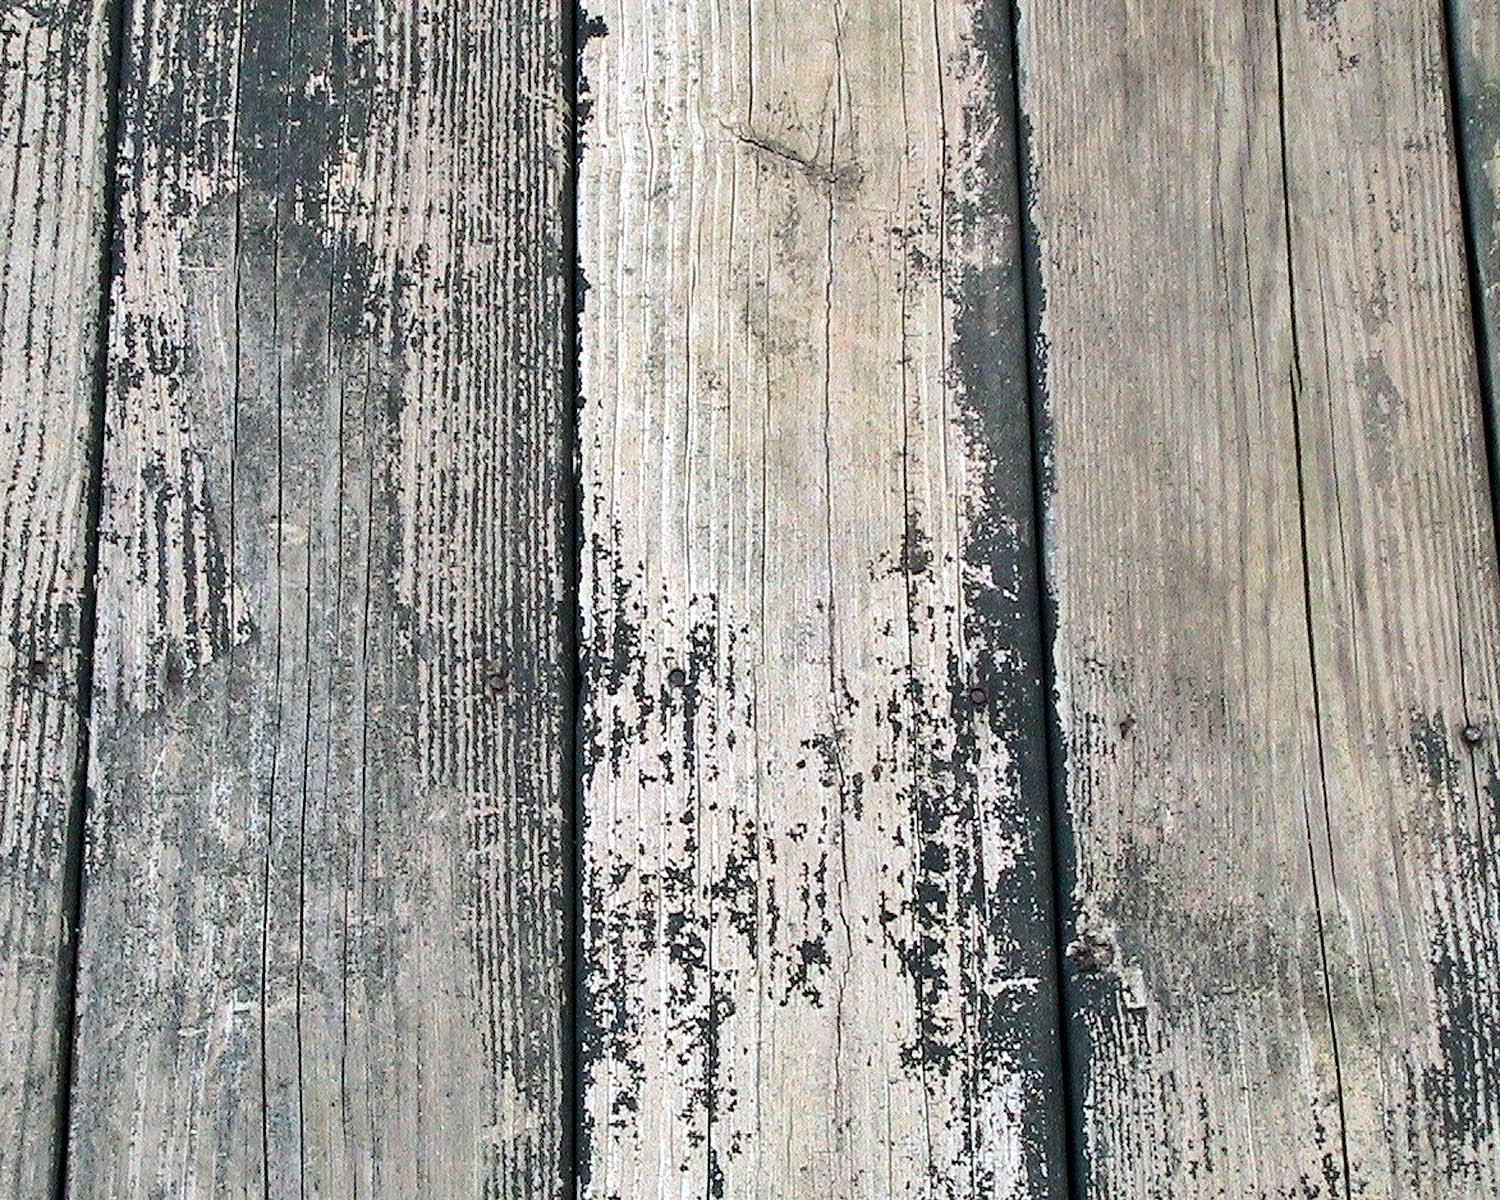 weathered wood   get domain pictures   getdomainvidscom 1500x1200